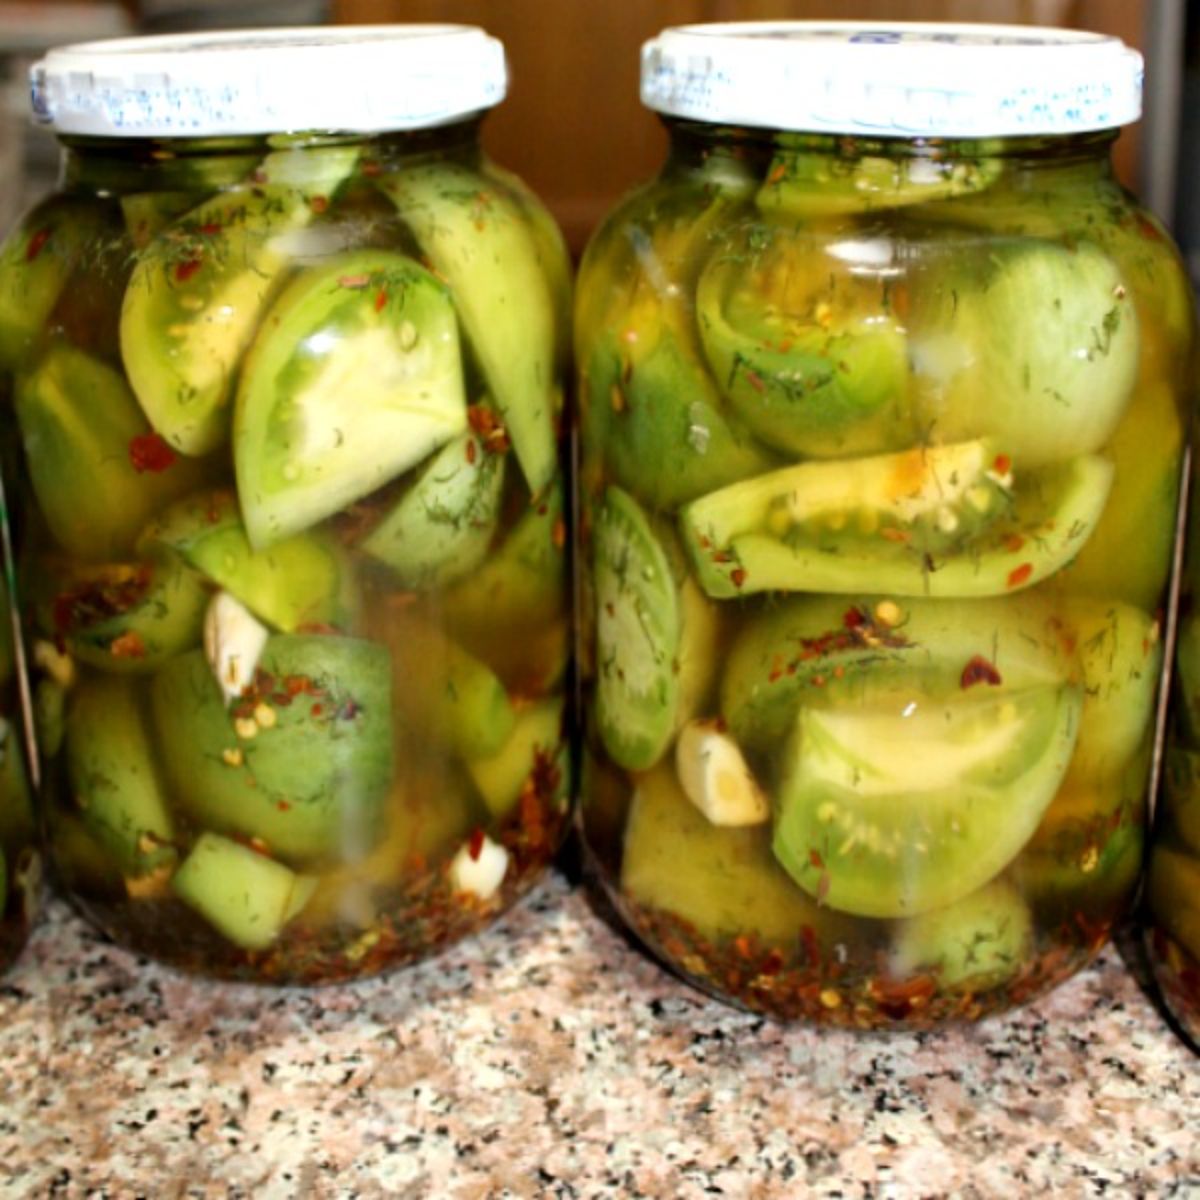 Spiced pickled green tomatoes in two glass jars.